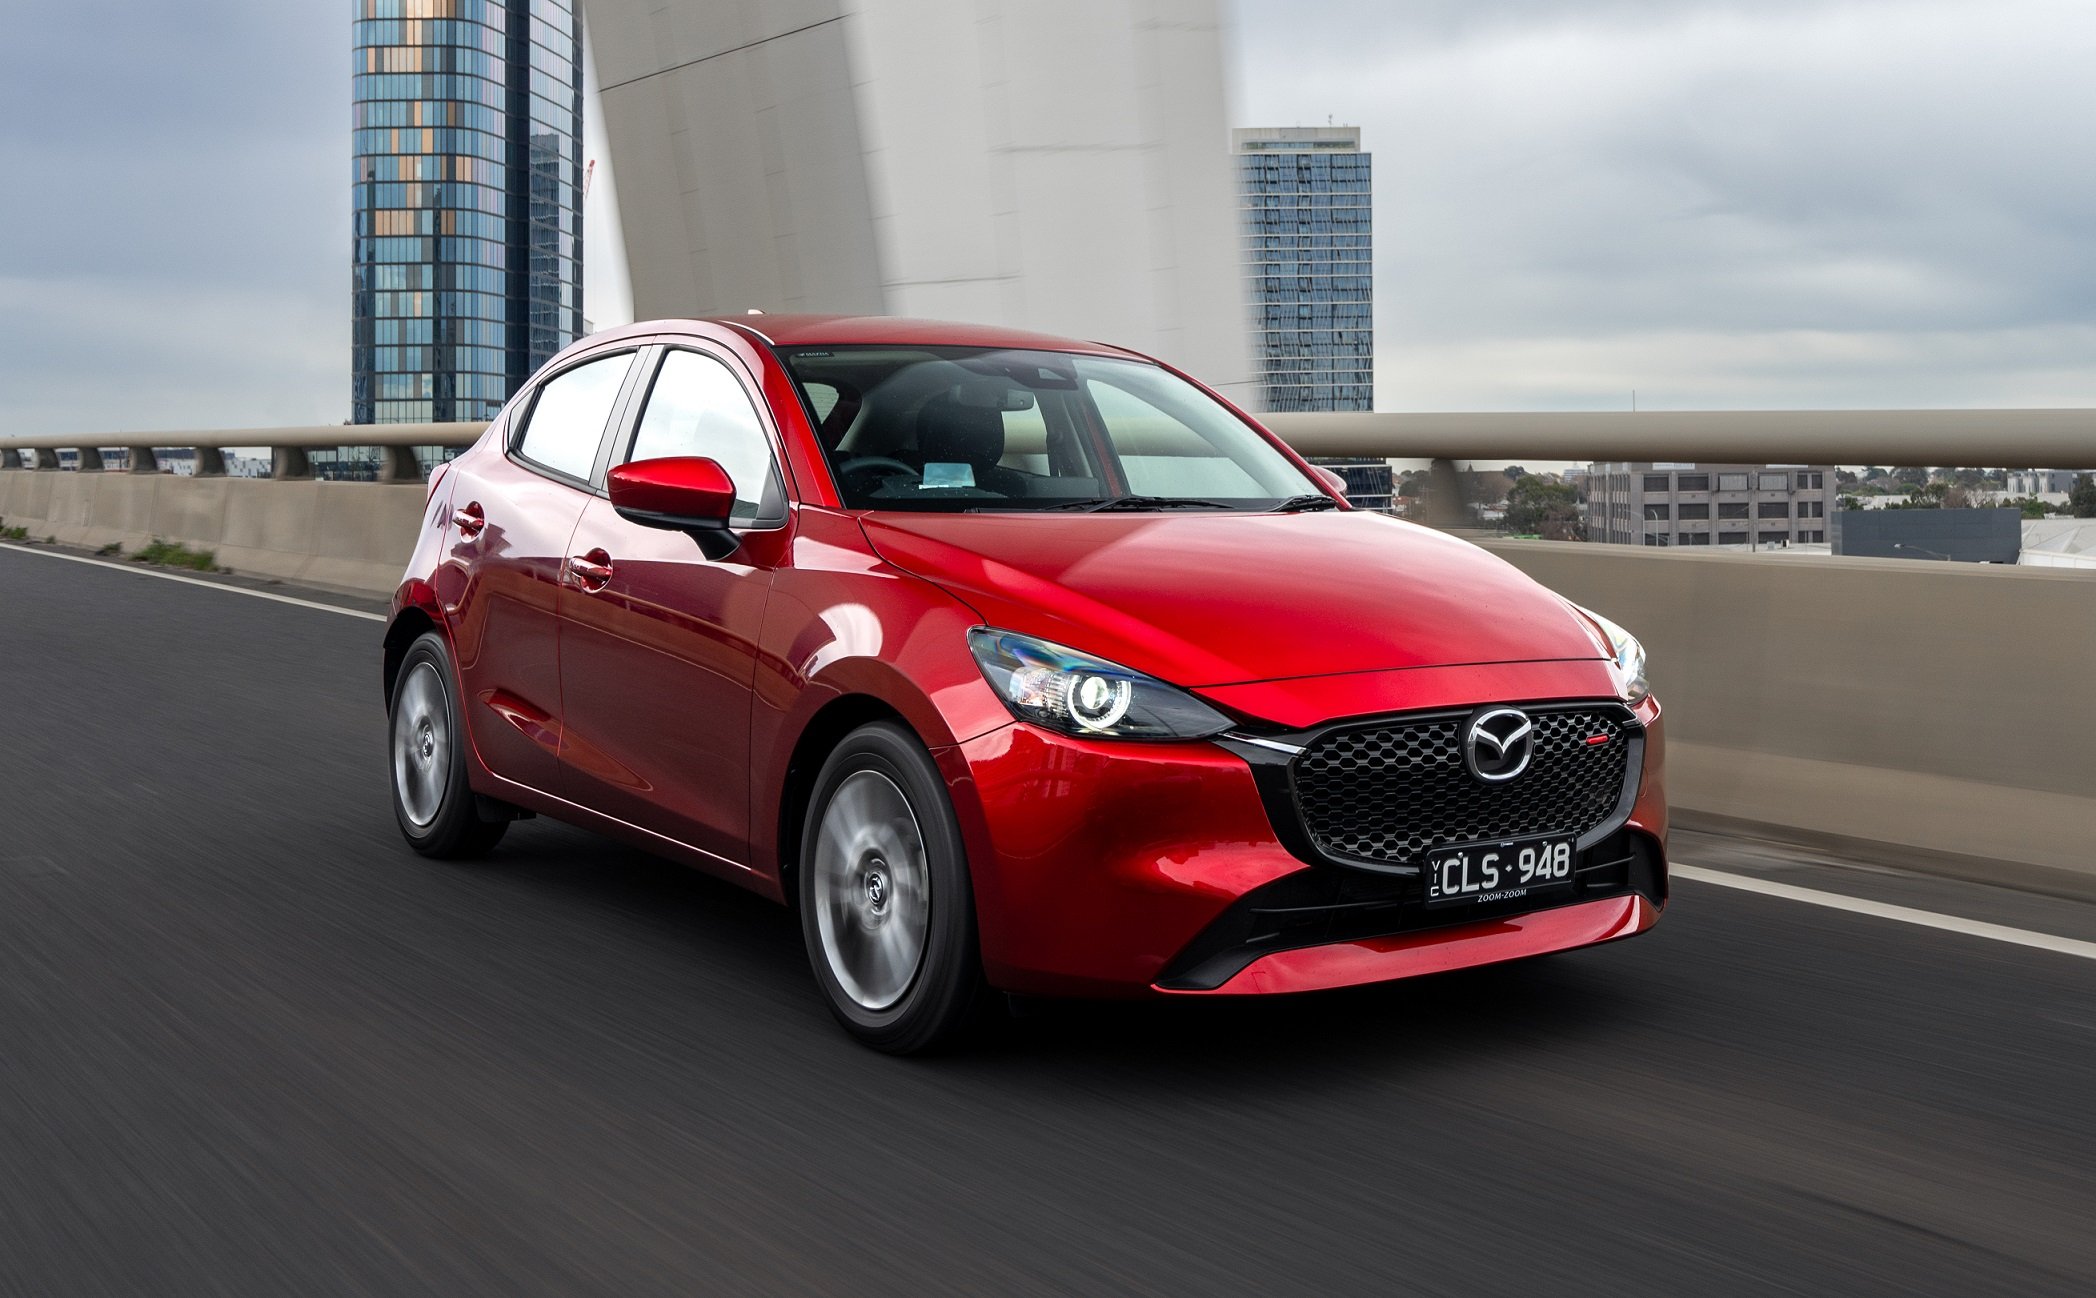 Mazda 2 review and buyer's guide — Auto Expert John Cadogan